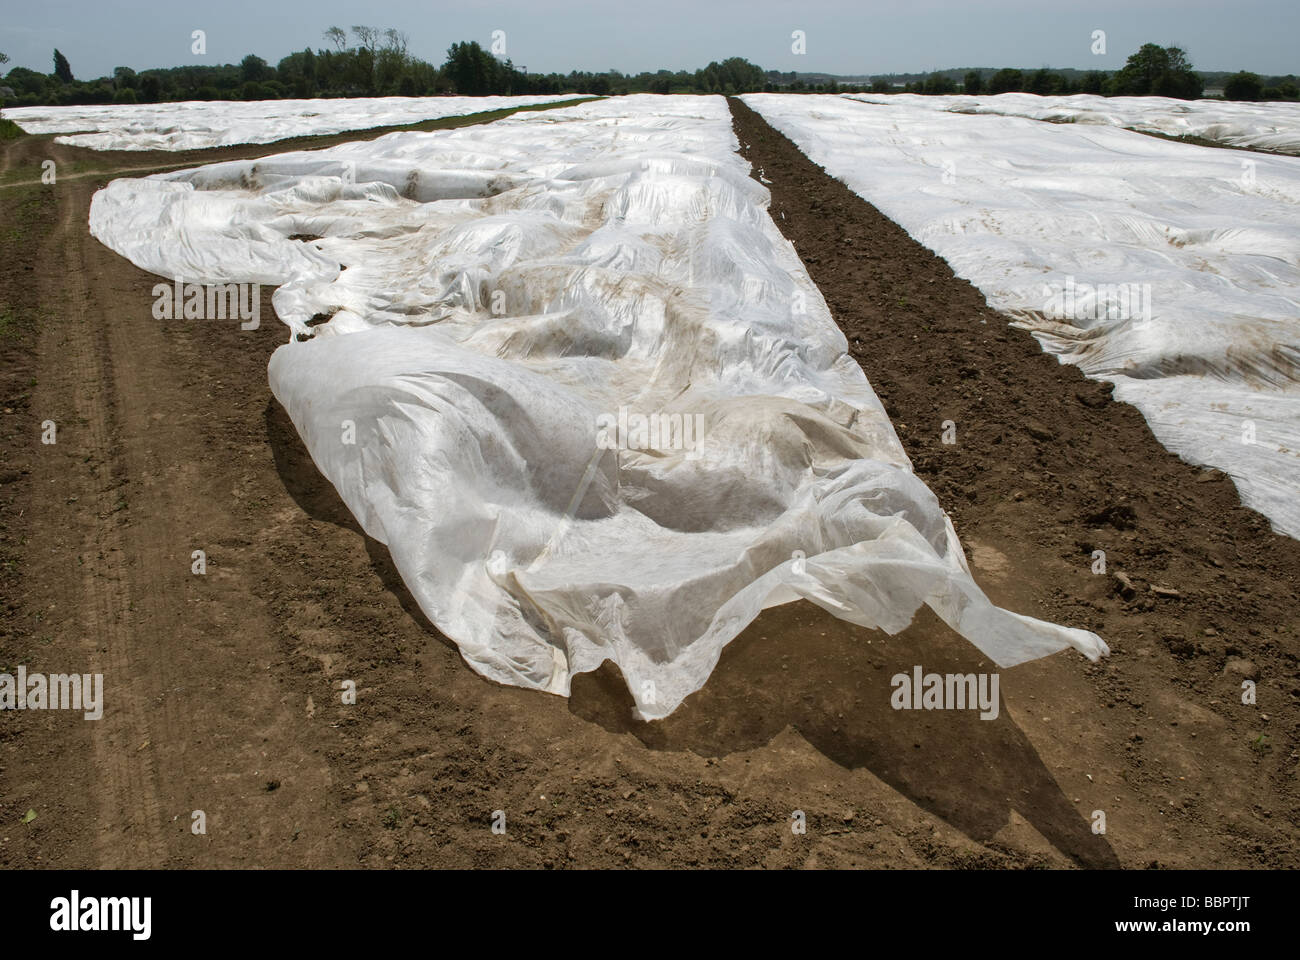 Fleece covering young Maize plants photographed on a windy day Stock Photo